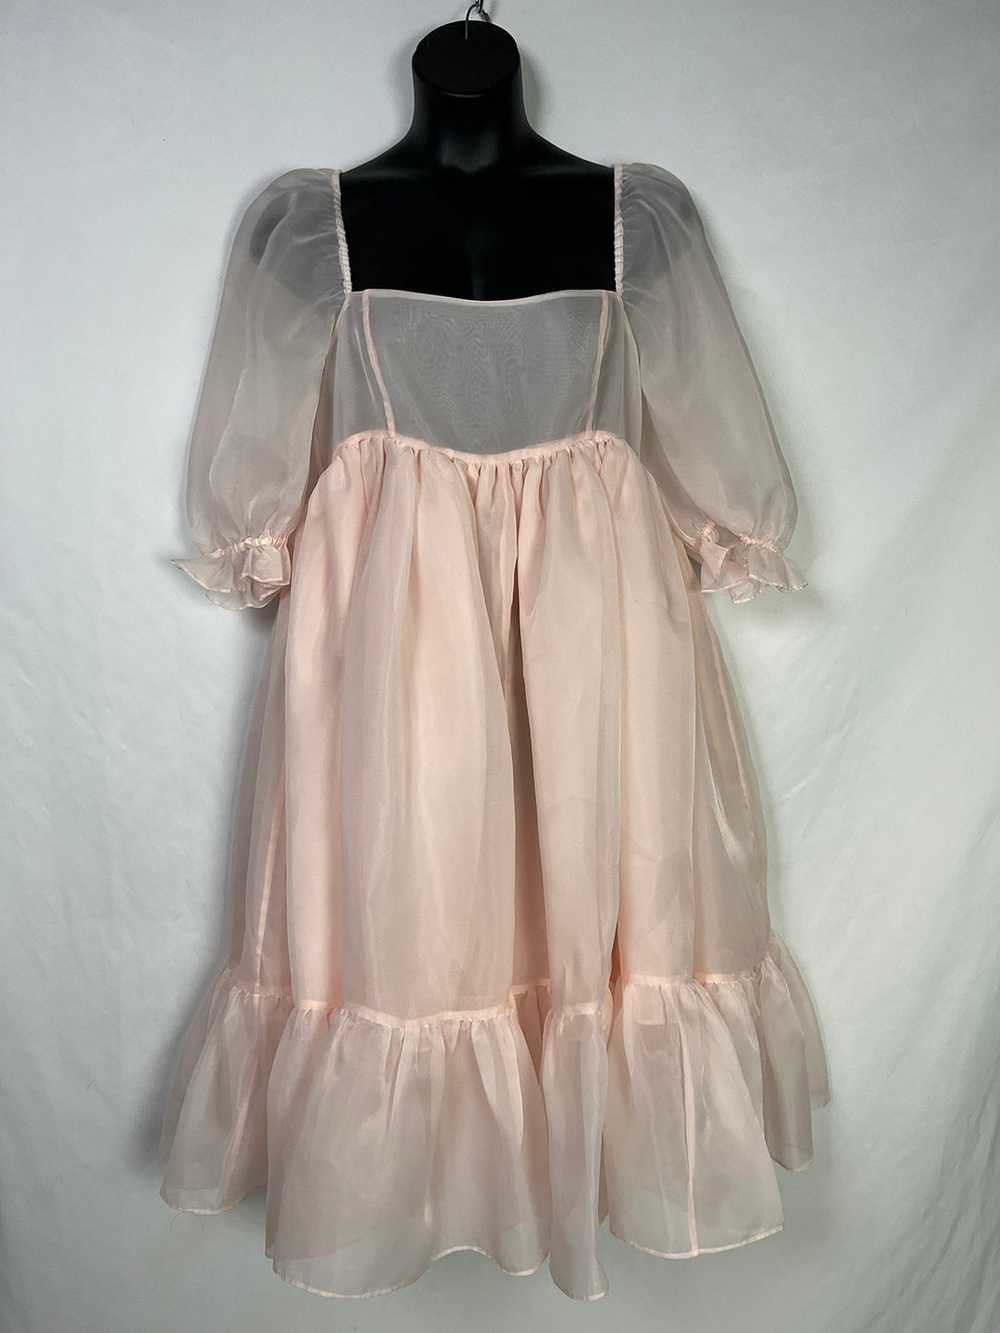 Selkie Size XL The Peach Skin French Puff Dress - image 4